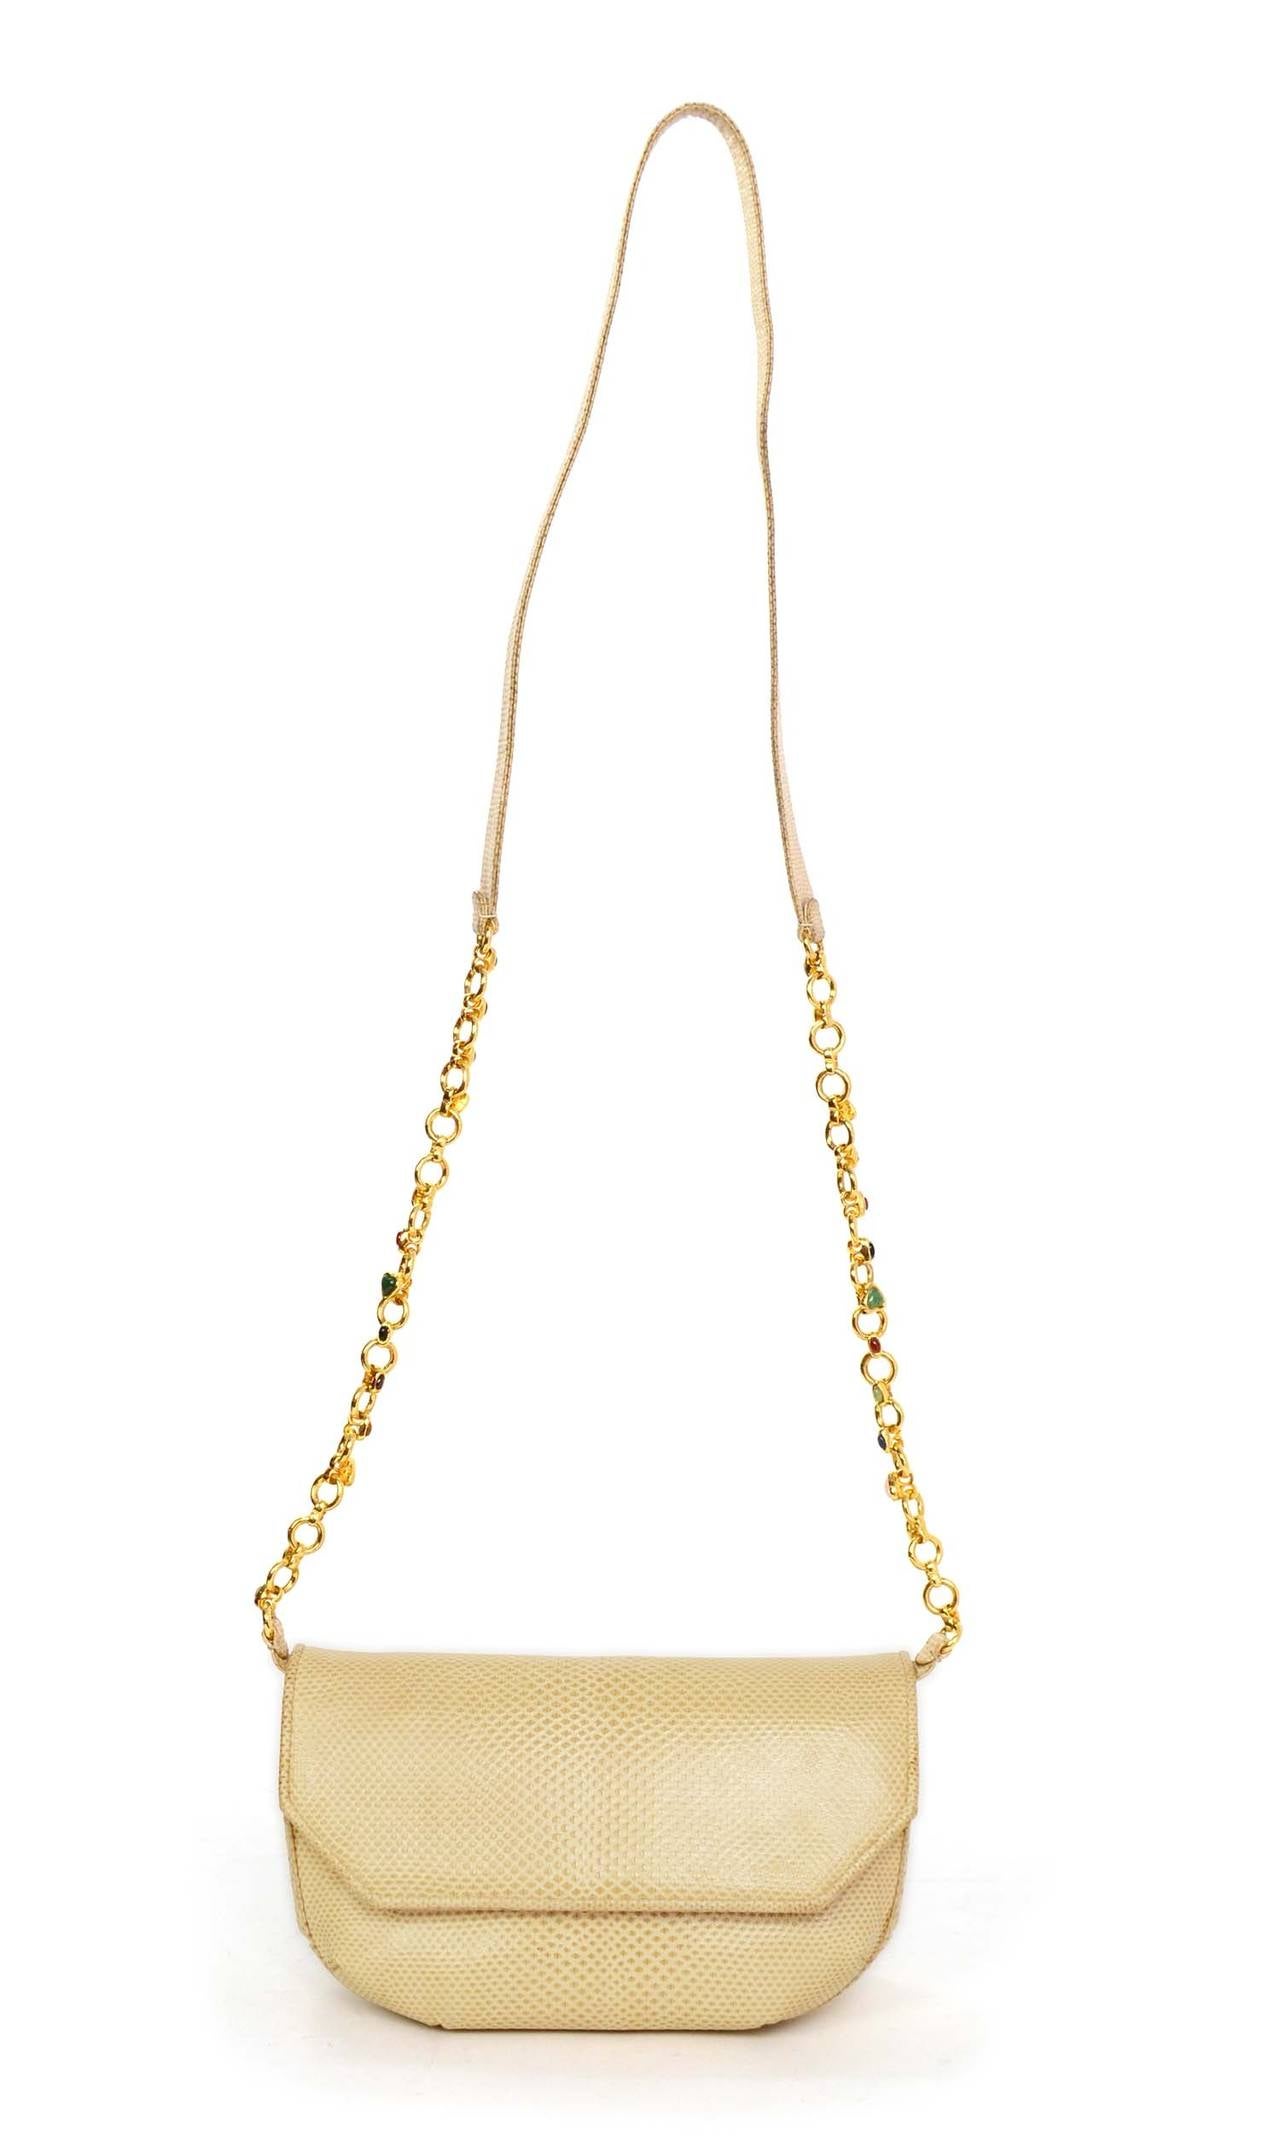 Judith Leiber Beige Lizard Evening Bag
Features multi-colored stones on chain link shoulder strap
Made in: Not given
Color: Beige and goldtone
Hardware: Goldtone
Materials: Lizard skin and metal
Lining: Beige textile
Closure/opening: Flap top